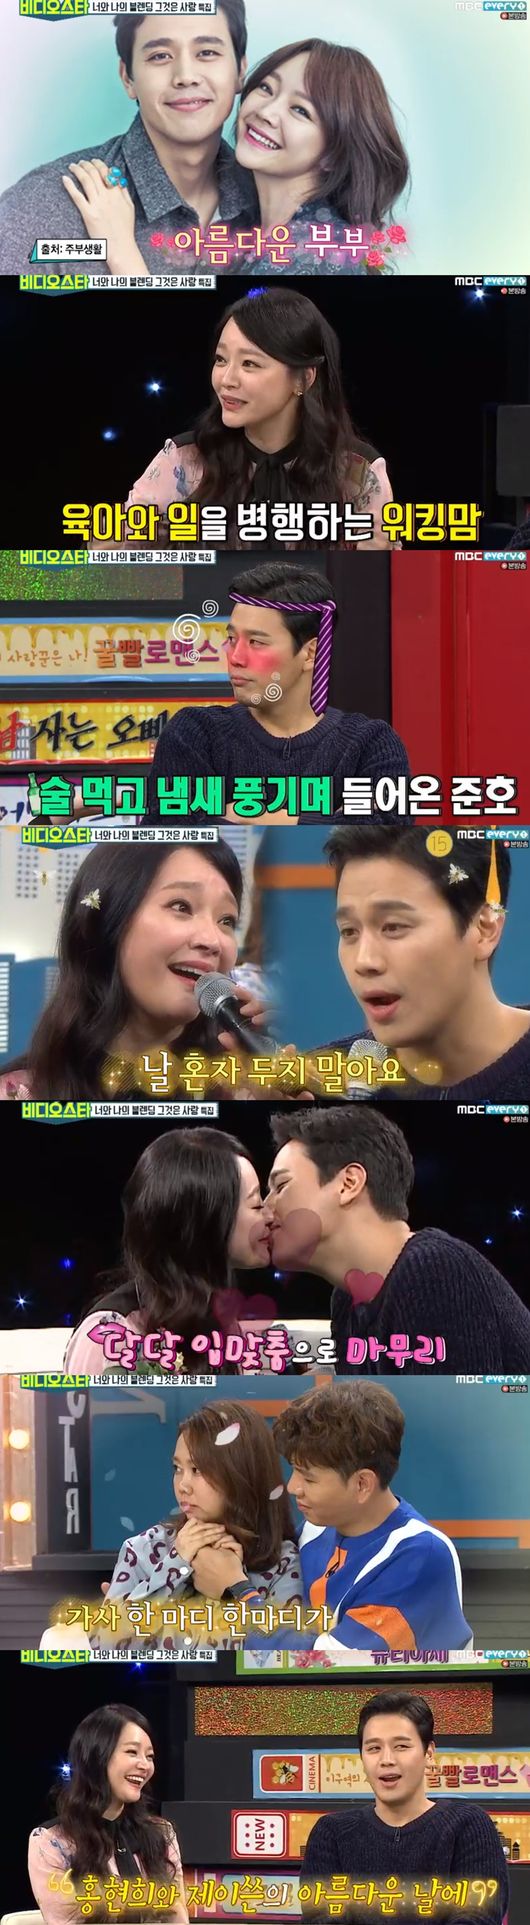 Kim So-hyun Son Jun-ho, Hong Hyon-hee Jay appeared in a couple special feature and showed off his breathing.MBC Every One video star broadcast on the 13th 8 years old kenko couple Kim So-hyun - Son Jun-ho, newly married couple Hong Hyon-hee - Jay writer appeared.On this day, Park Hana, who became a hot topic with a oriental medicine doctor, joined as a special MC.I thought Id find a new look for my wife, so I appeared, Son Jun-ho said of the occasion for Bees appearance.Asked about accepting husbands complaints, Son Jun-ho said: I hope my wife is comfortable, she doesnt show anyone for eight years, I wash myself when I sleep, and Im eating before I get up.I am diligent, but I am more diligent than I am. Kim So-hyun said, At first, I met at the performance and I was stressed about that because I only saw stage makeup.When Im sick, I was scouring when I was in the shower when I was newlyweds, and I got scolded, which is content without MSG, Son Jun-ho said.The Hong Hyon-hee and Jay-Won couple are appearing in Bees three days before marriage; Jay-Won said, Is it right that I am marriage?I had no idea of ​​marriage until January of this year. I announced marriage to my parents on Mothers Day. Hong Hyon-hee said: I wanted to continue marriage three years ago.And I wanted to marriage in October, listening to on a wonderful day in October on the radio.So I kept saying that I would marriage in October, and it finally happened. Jay writes of Hong Hyon-hees charm: Its comfortable, its fun and funny, and Hyun-hee herself makes people feel comfortable and funny.I think its marriage opponents that a man feels comfortable, so I did the proposal first, he said.In fact, at the beginning, I wanted to hear that I was pretty, but I fought because I was comfortable, Hong Hyon-hee said.When asked when she looked the prettiest, Jay-Tun smiled, Baby, its cute when you jump in.There was a time for clarification of Park Na-rae and Jay-Wons Thumb.Park Na-rae said, I am close to Kang Kyun Sung, and Jay wrote the house of Kang Kyun Sung at that time.He asked me to help him, so I went with him and fixed it. He was a good brother, so I asked him to stay in touch with Jayson.I thought it was a story for Jay-Sun, of course. Hong Hyon-hee and Jay wrote marriages in five months after meeting.Hong Hyon-hee said, I contacted Jo Se-ho on the day of the announcement of the marriage and It is good to be able to finish this.Nam Chang-hee said, I have no contact at all.In response to MCs asking them to send video letters to the past, Hong Hyon-hee said, Im so sorry. I already missed the car.I hope you will meet a good woman, he laughed.Kim So-hyun said, I do not do well in front of Friend unless I am a mother.Im practicing musicals for 12 hours these days, so its too hard to wear a dress, but I want to do it, but I do not think I can live like this for too long. Son Jun-ho said, I have a time to endure my wife leaking out, and then I shout Oh! and laughed.Hong Hyon-hee gave Jay-Thun a card. Jay-Thun said, I was surprised that I never received a credit card from my parents.But Hong Hyon-hee gave me a card. When asked why he was attacking the material, Hong Hyon-hee said, I have it because I am a sister.I used to scratch once or twice, but Jay-Sun was scratched at all. At the end of the broadcast, Son Jun-ho and Jay-Won sent video letters to their wives; Hong Hyon-hee wept in tears of emotion.Jay, who saw this, said, I feel bad when I see tears. I think I should not let them shed tears.